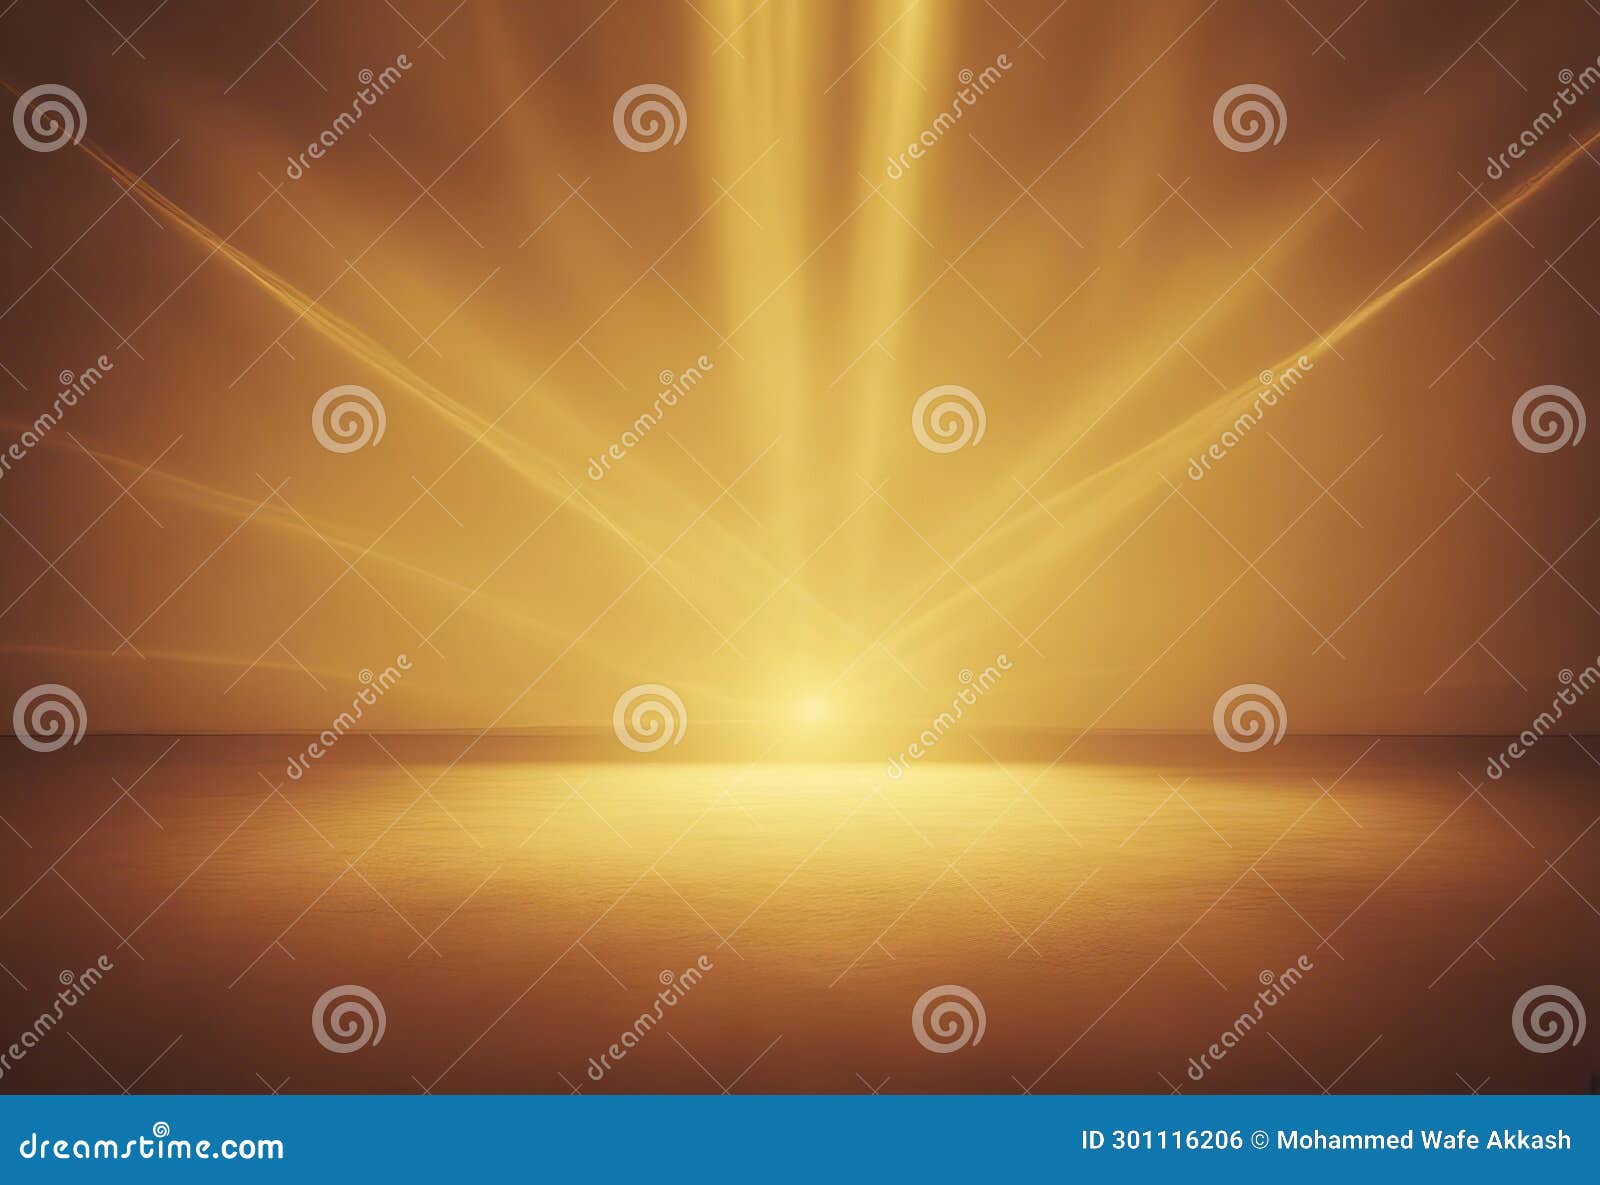 distressed yellow paper with light rays stock photo1970-1979, retro style, backgrounds, pattern, old-fashioned